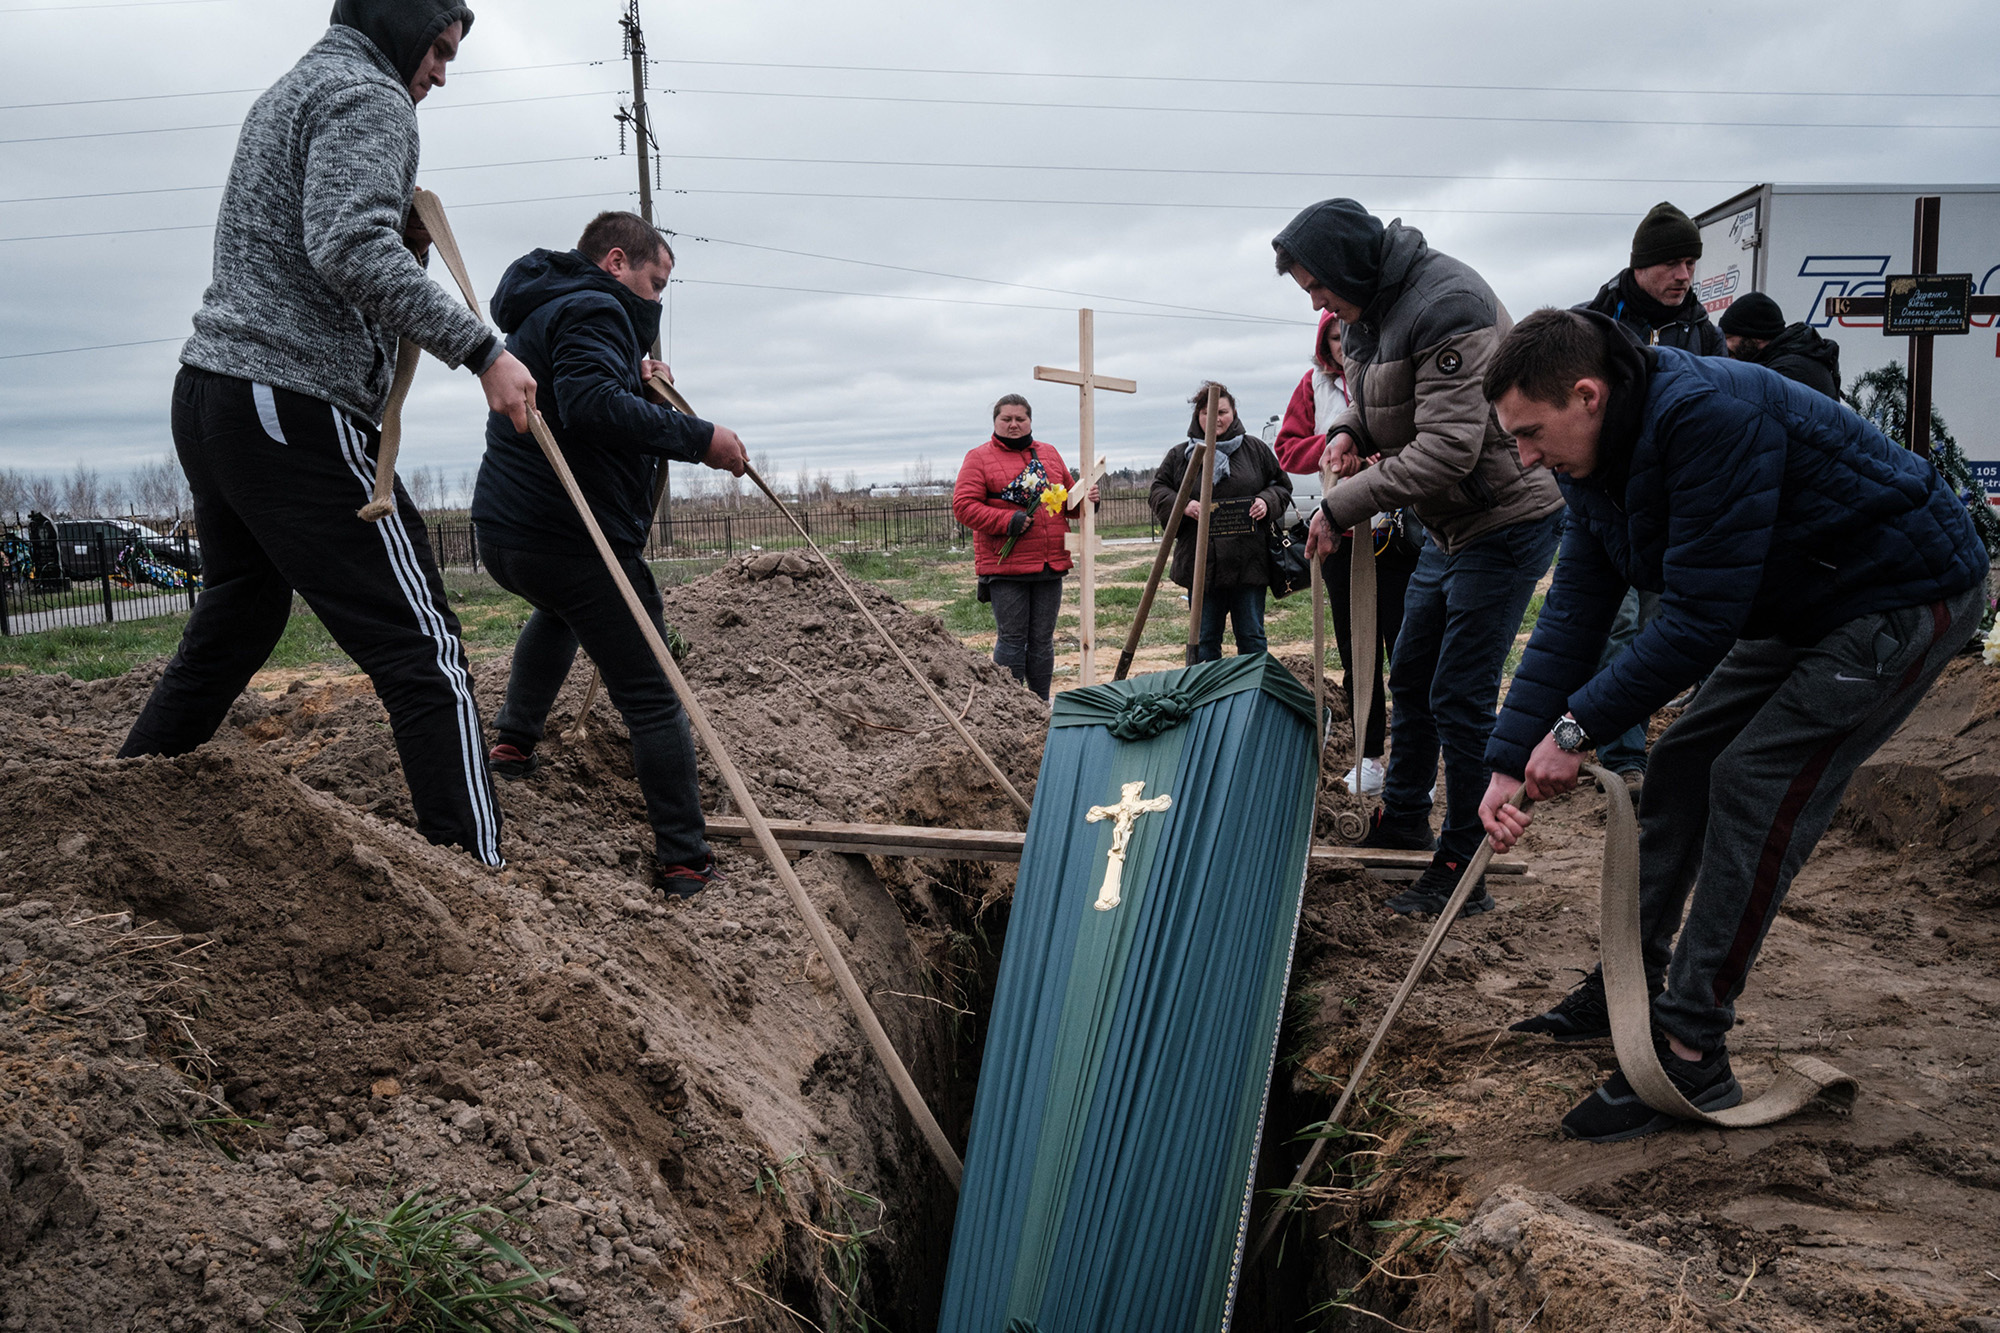 Relatives of Mykhailo Romaniuk, 58, who was shot dead on his bicycle on March 6, help to bury his coffin at a cemetery in Bucha, Ukraine, on April 19.